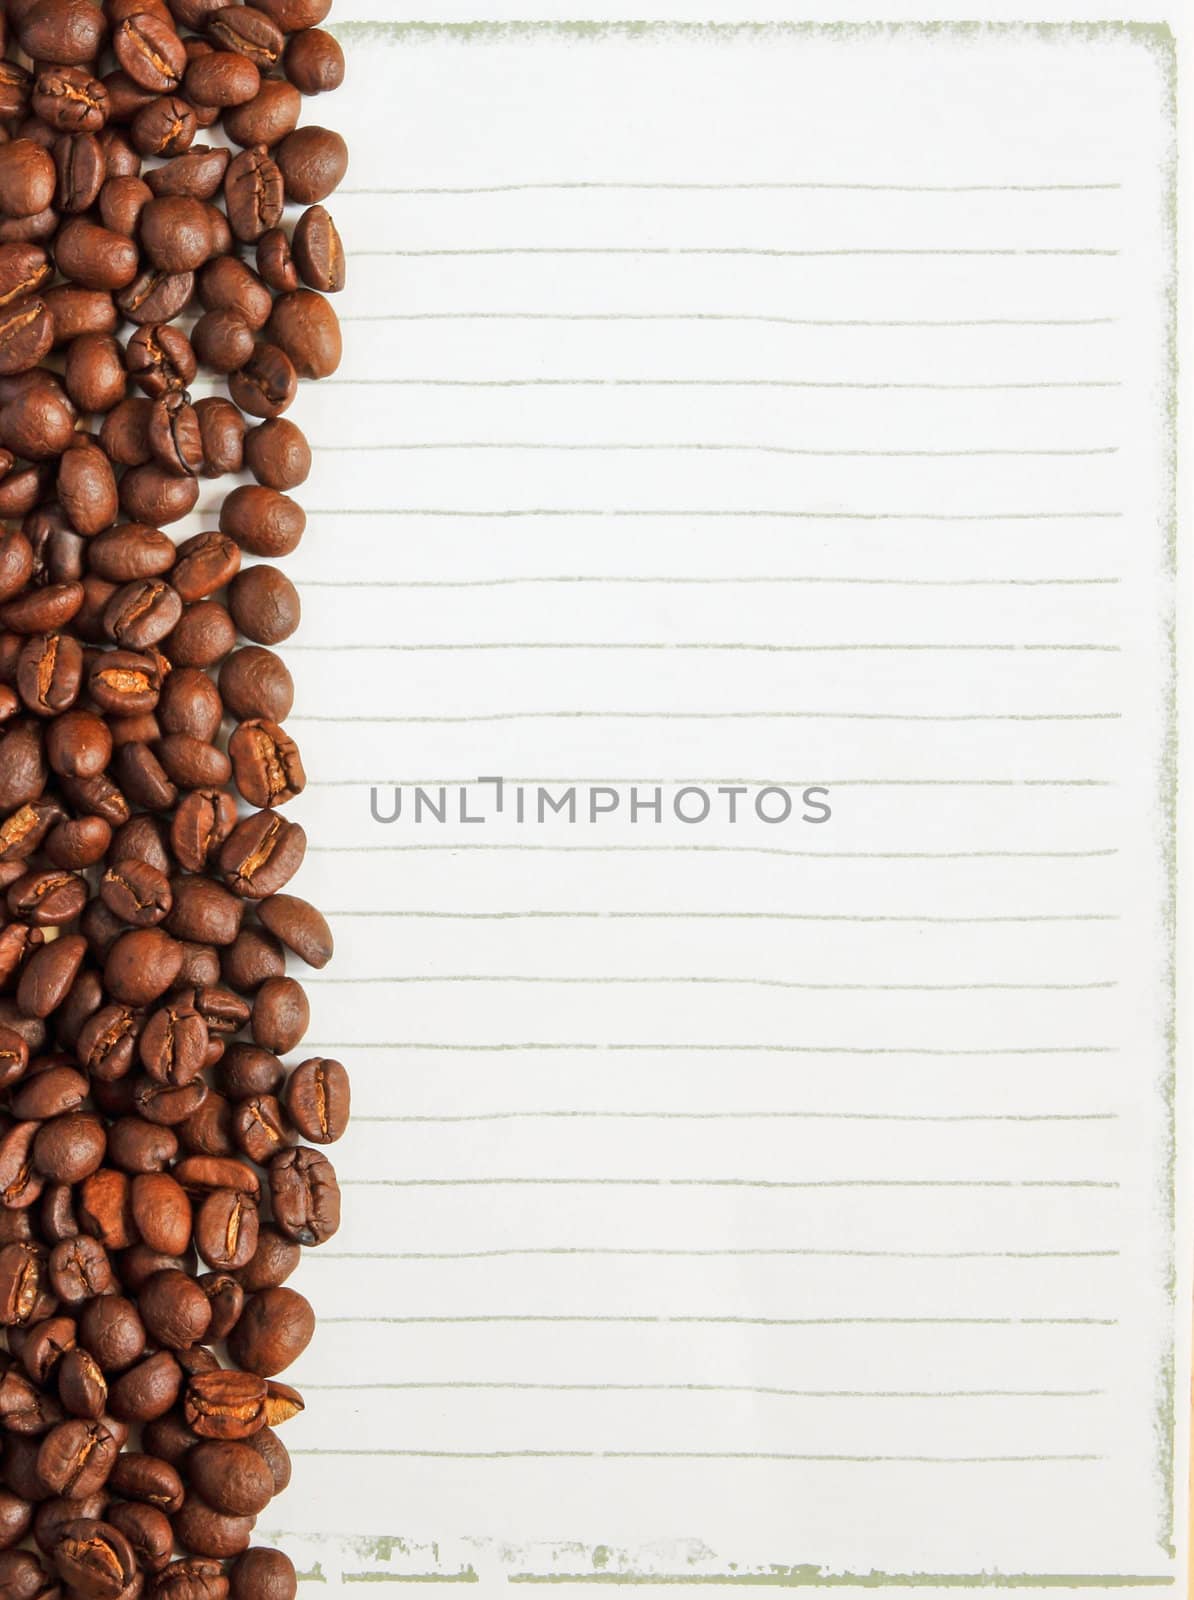 Coffee beans on white paper background for notes 